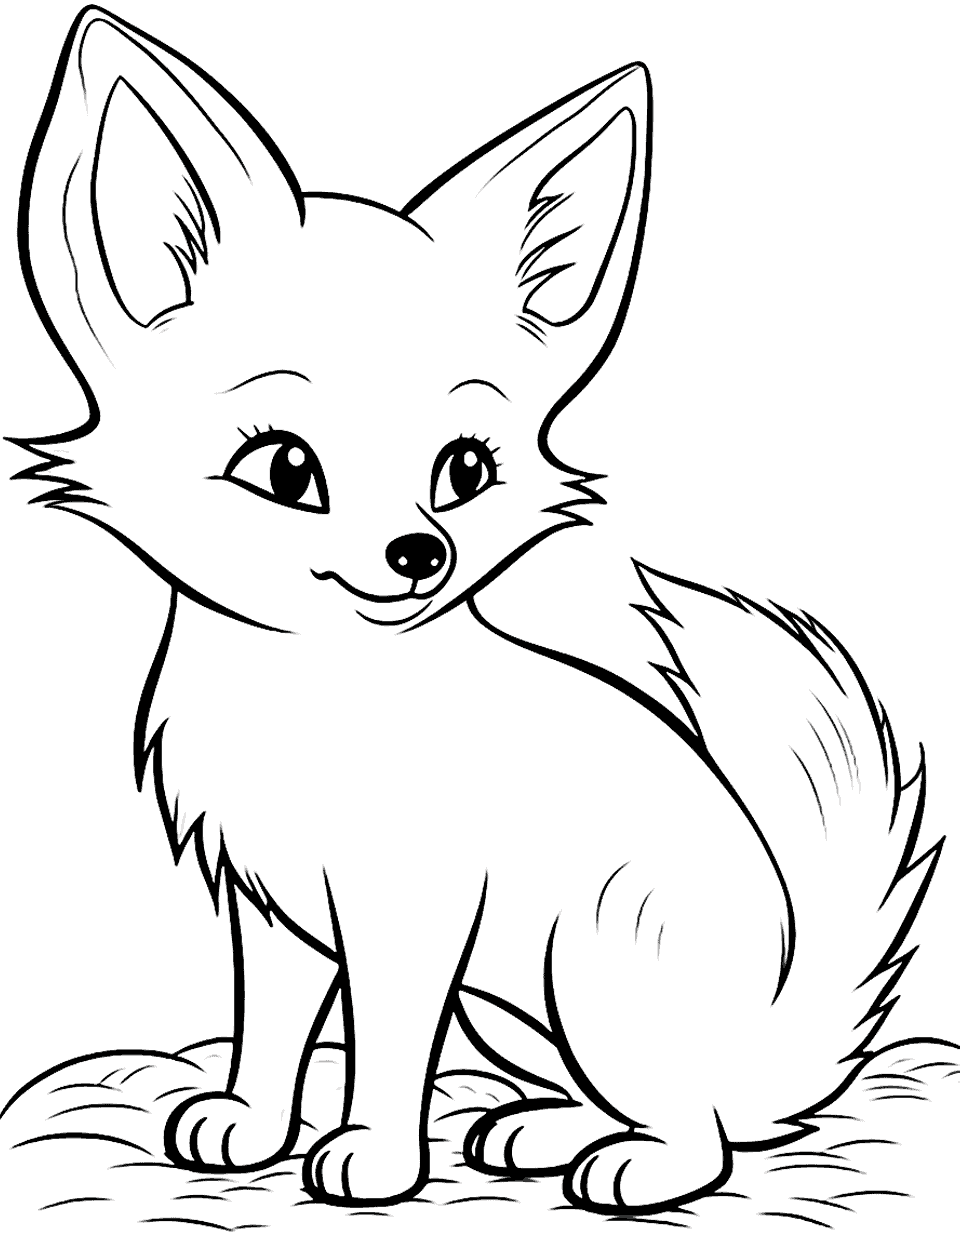 Curious Fox Cub Coloring Page - A young fox cub with a look of wonder.